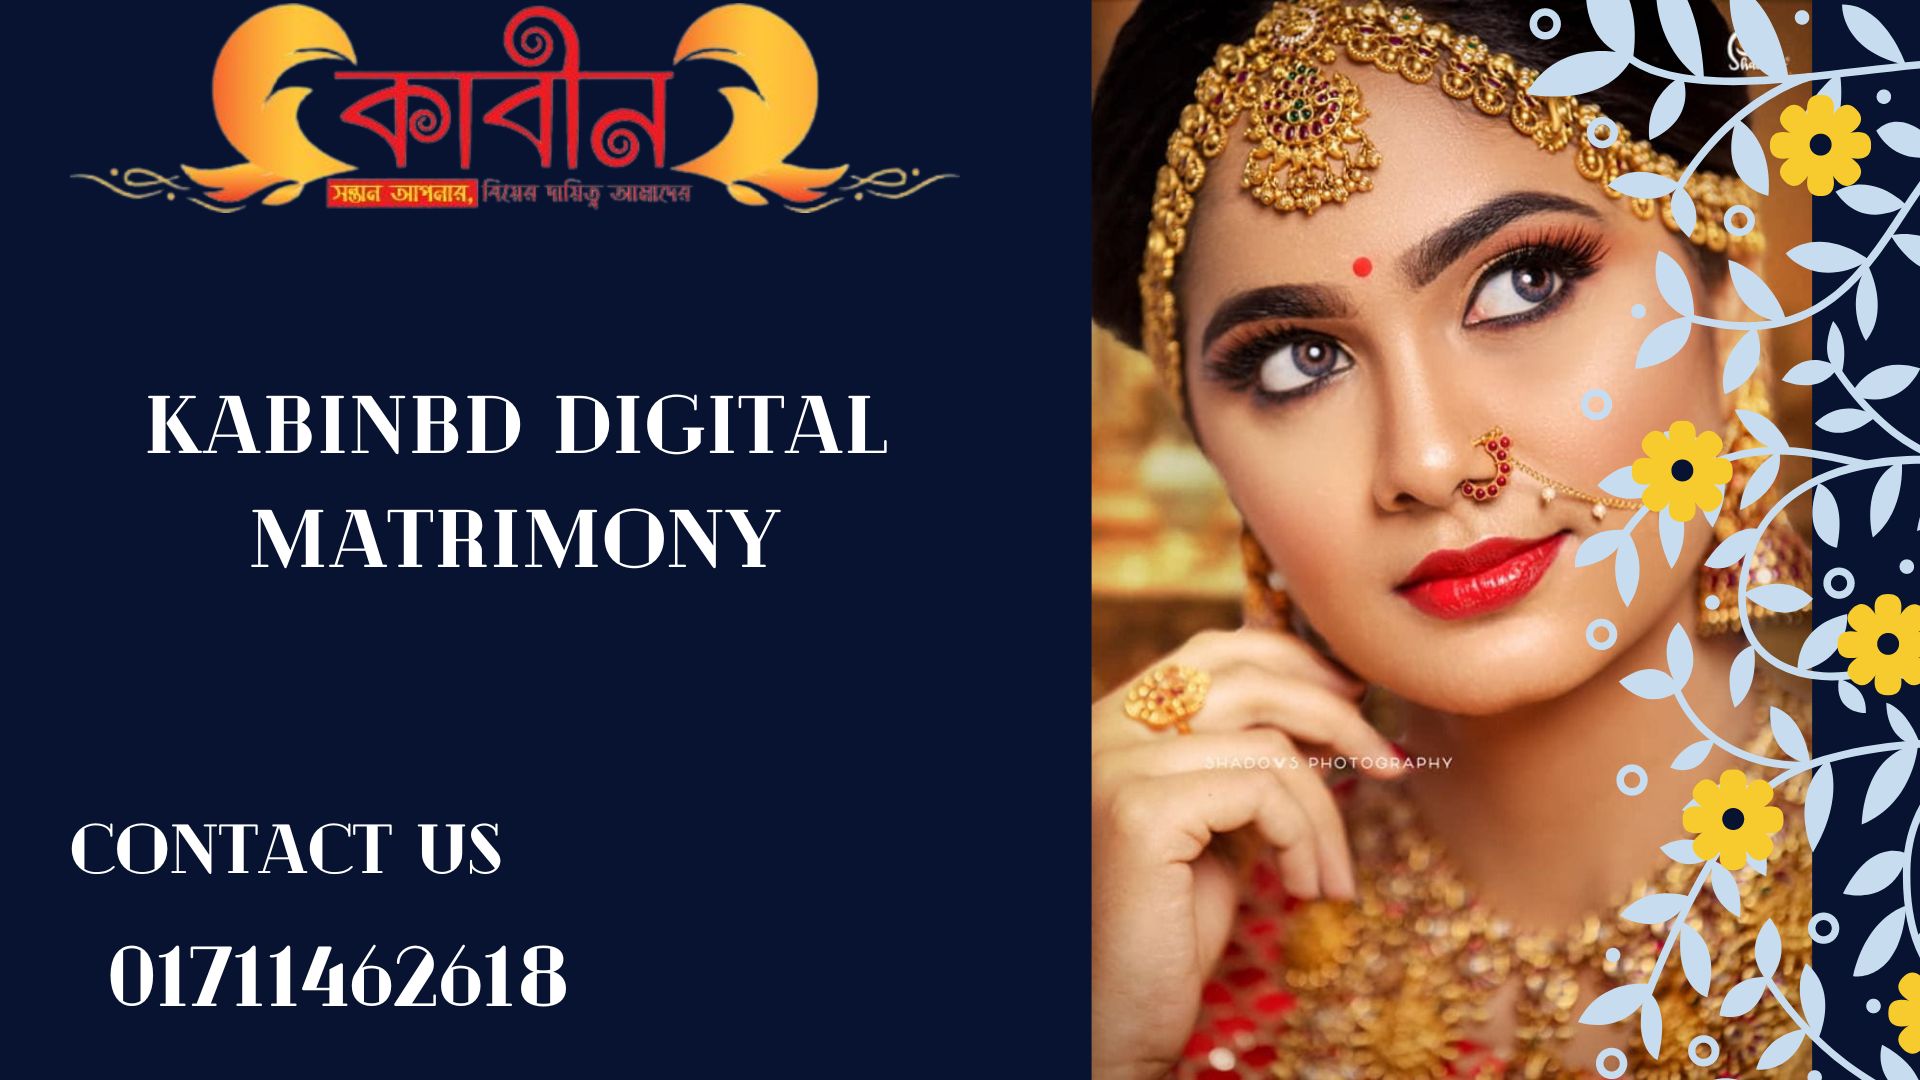 The growing importantance of matrimonial sites in Bangladesh